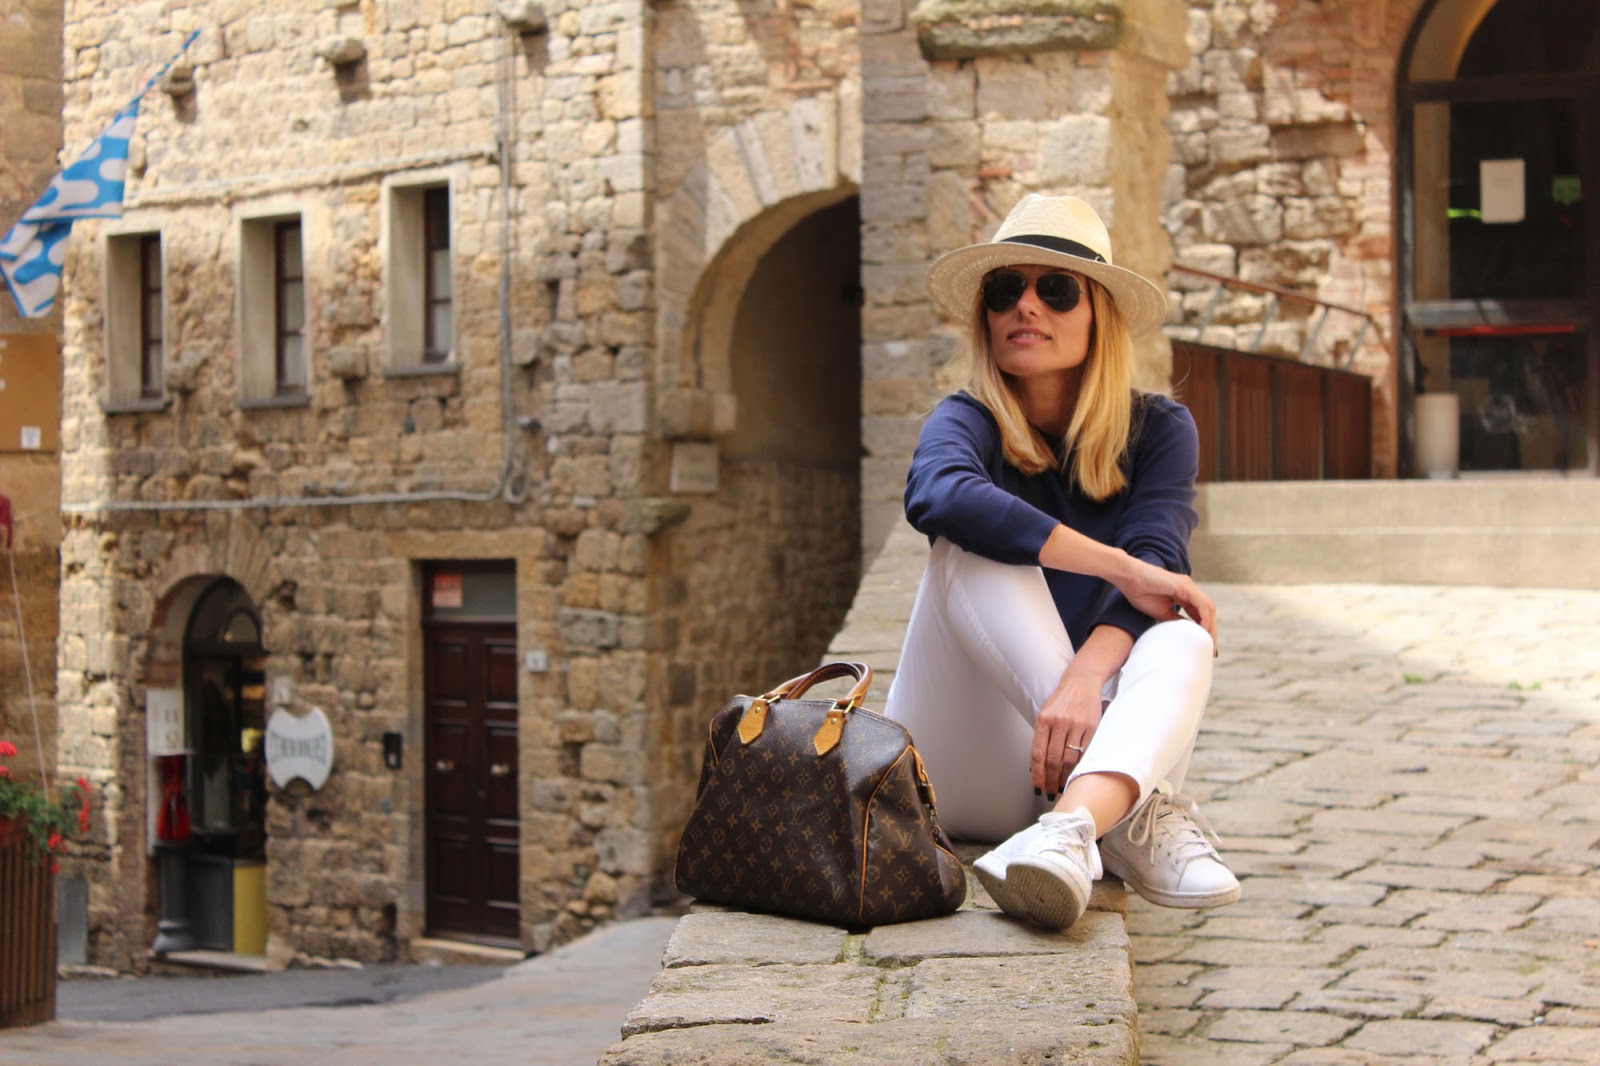 Eniwhere Fashion - Volterra - Blue and white outfit